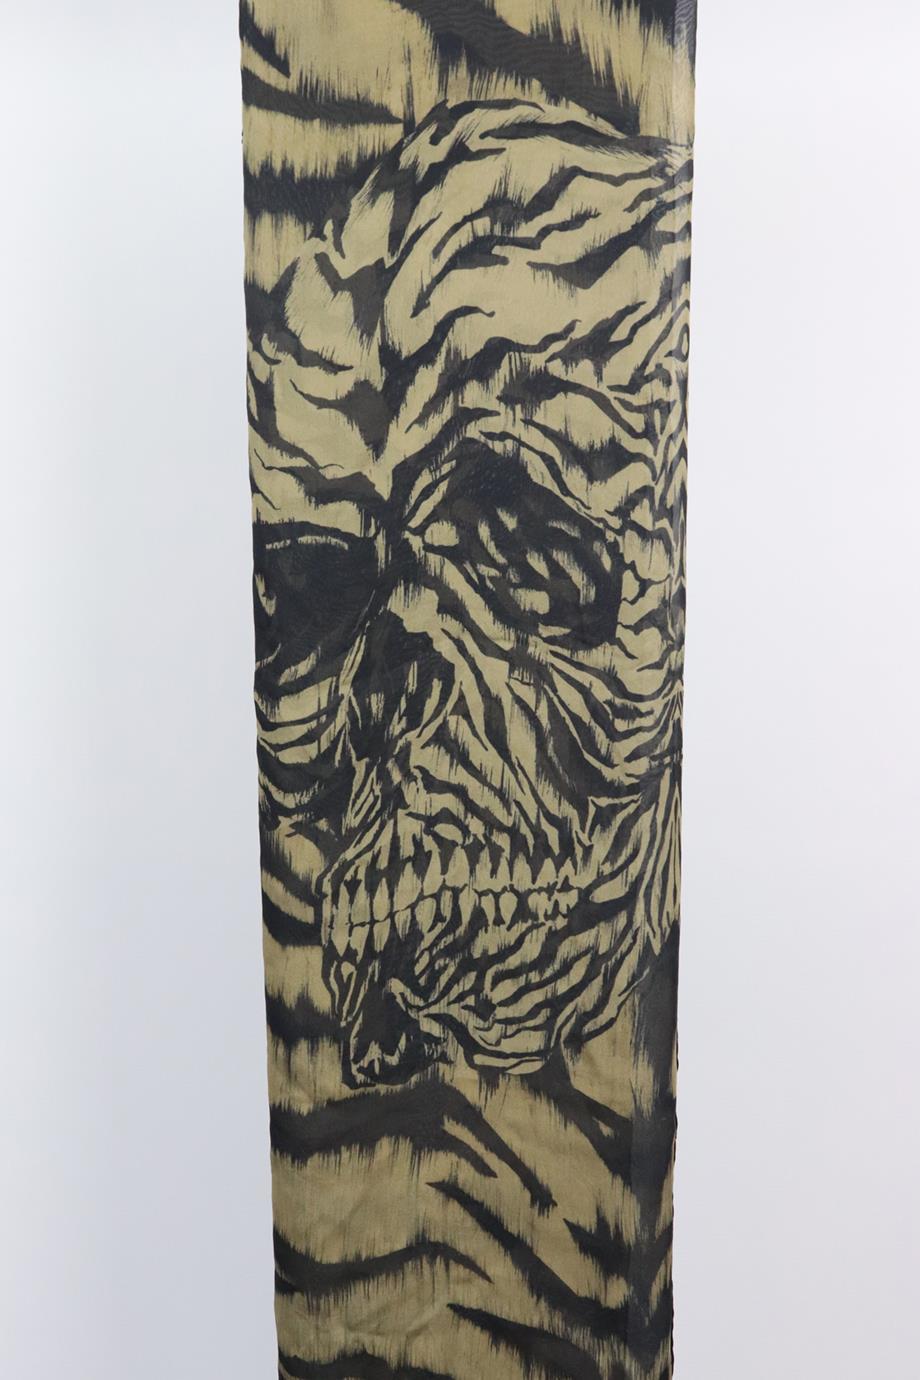 Alexander McQueen printed silk chiffon scarf. Black and khaki. 100% Silk. Does not come with dustbag or box. Length: 50 in. Width: 50 in. Very good condition - Some marks on corner; see pictures.